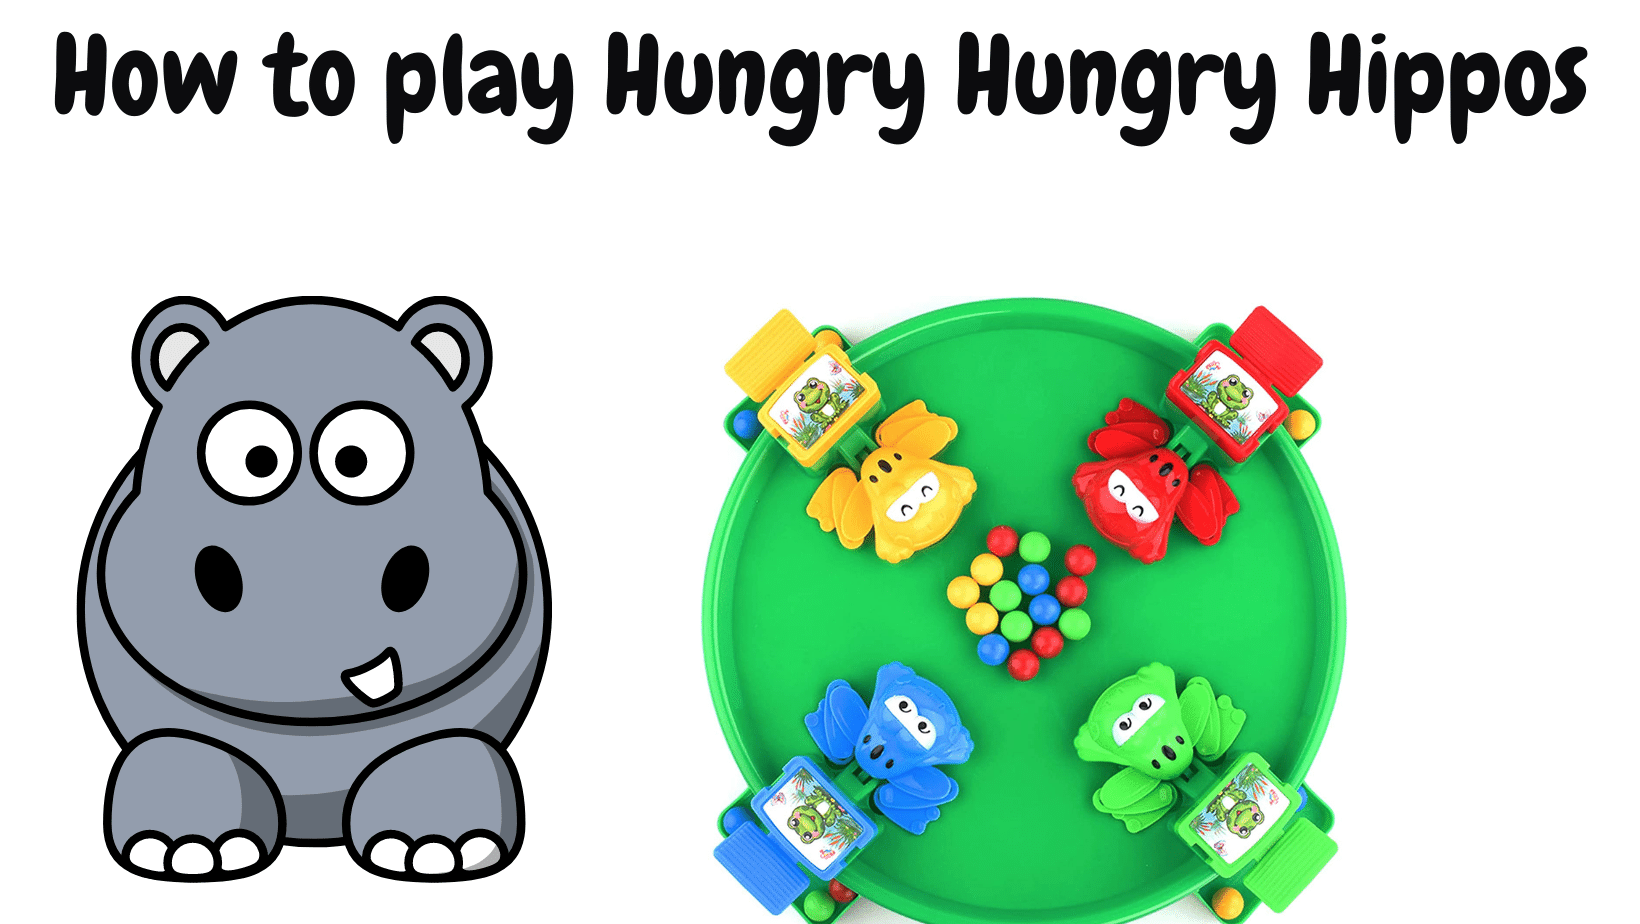 How to play hungry hungry hippos